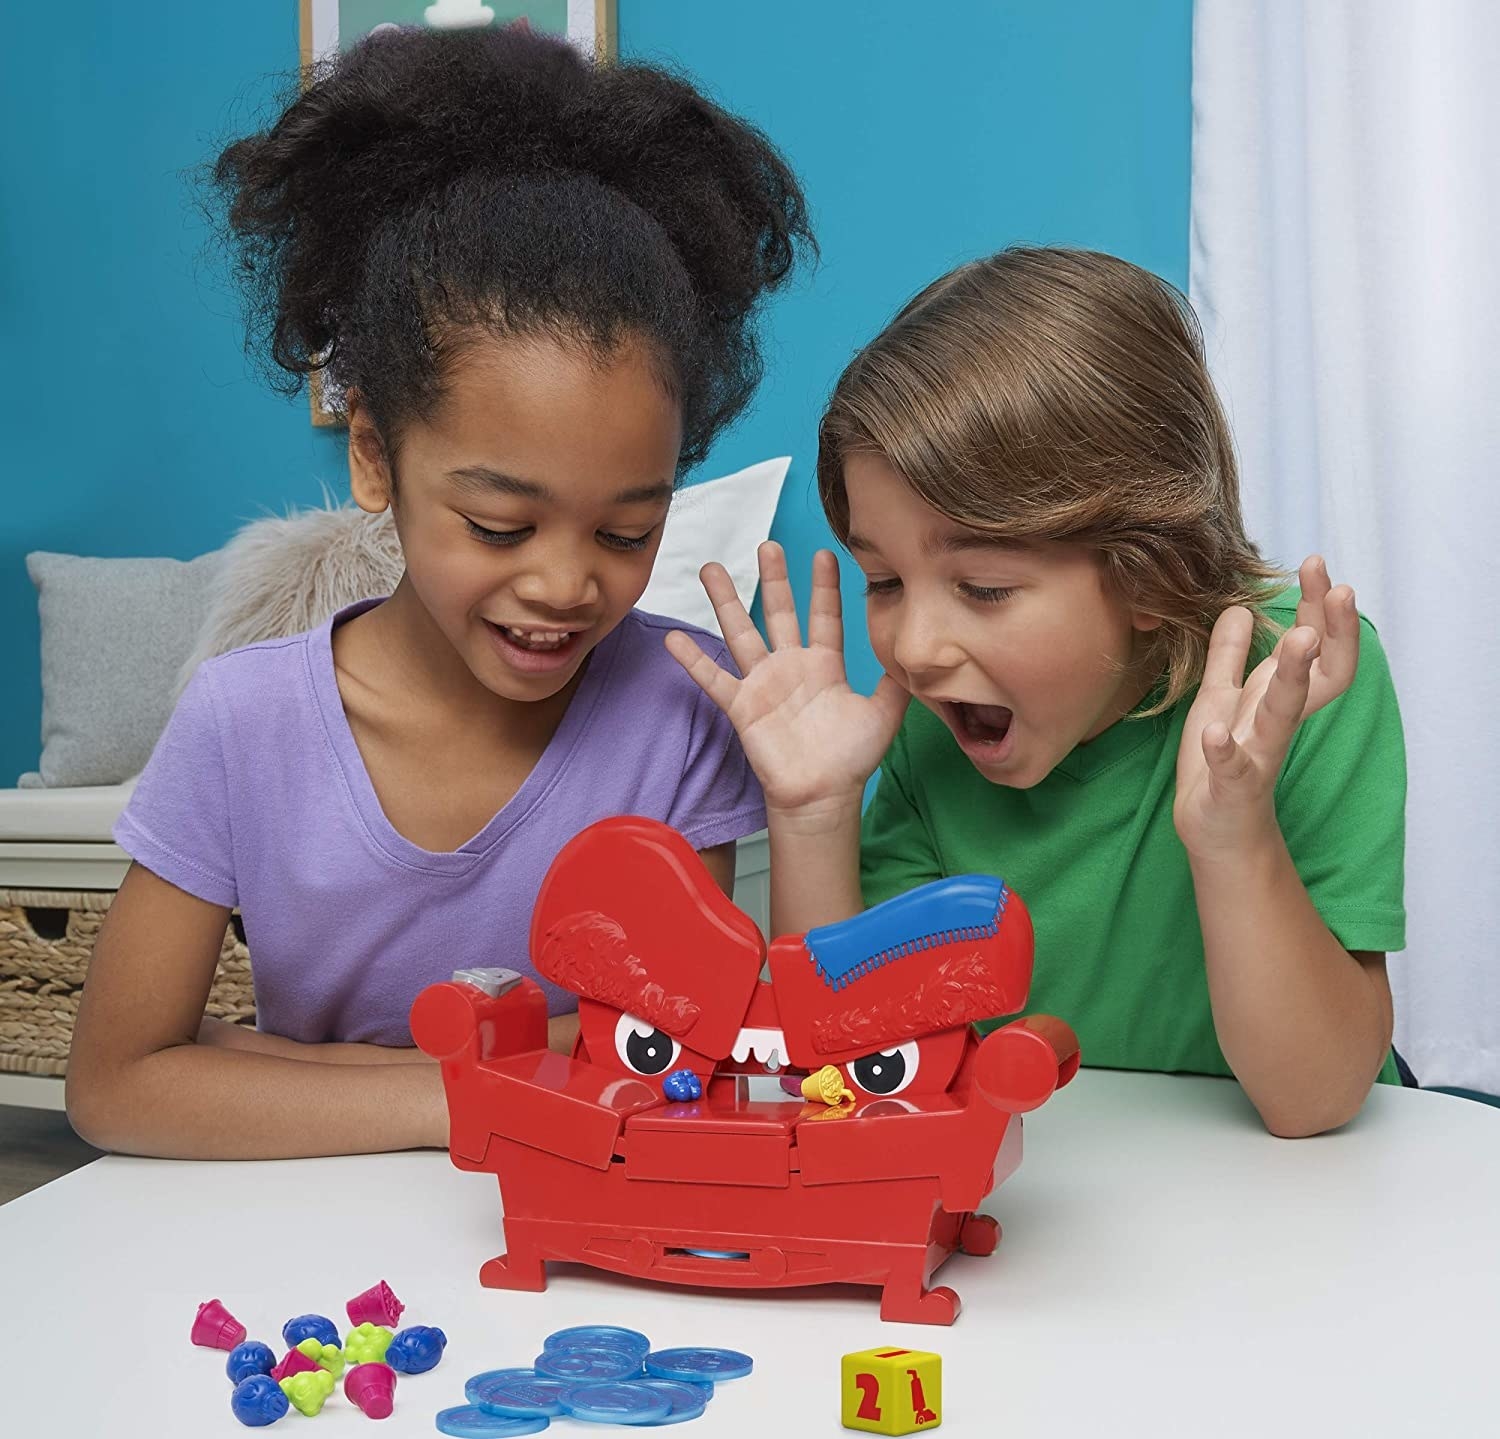 Two child models playing with red plastic couch game